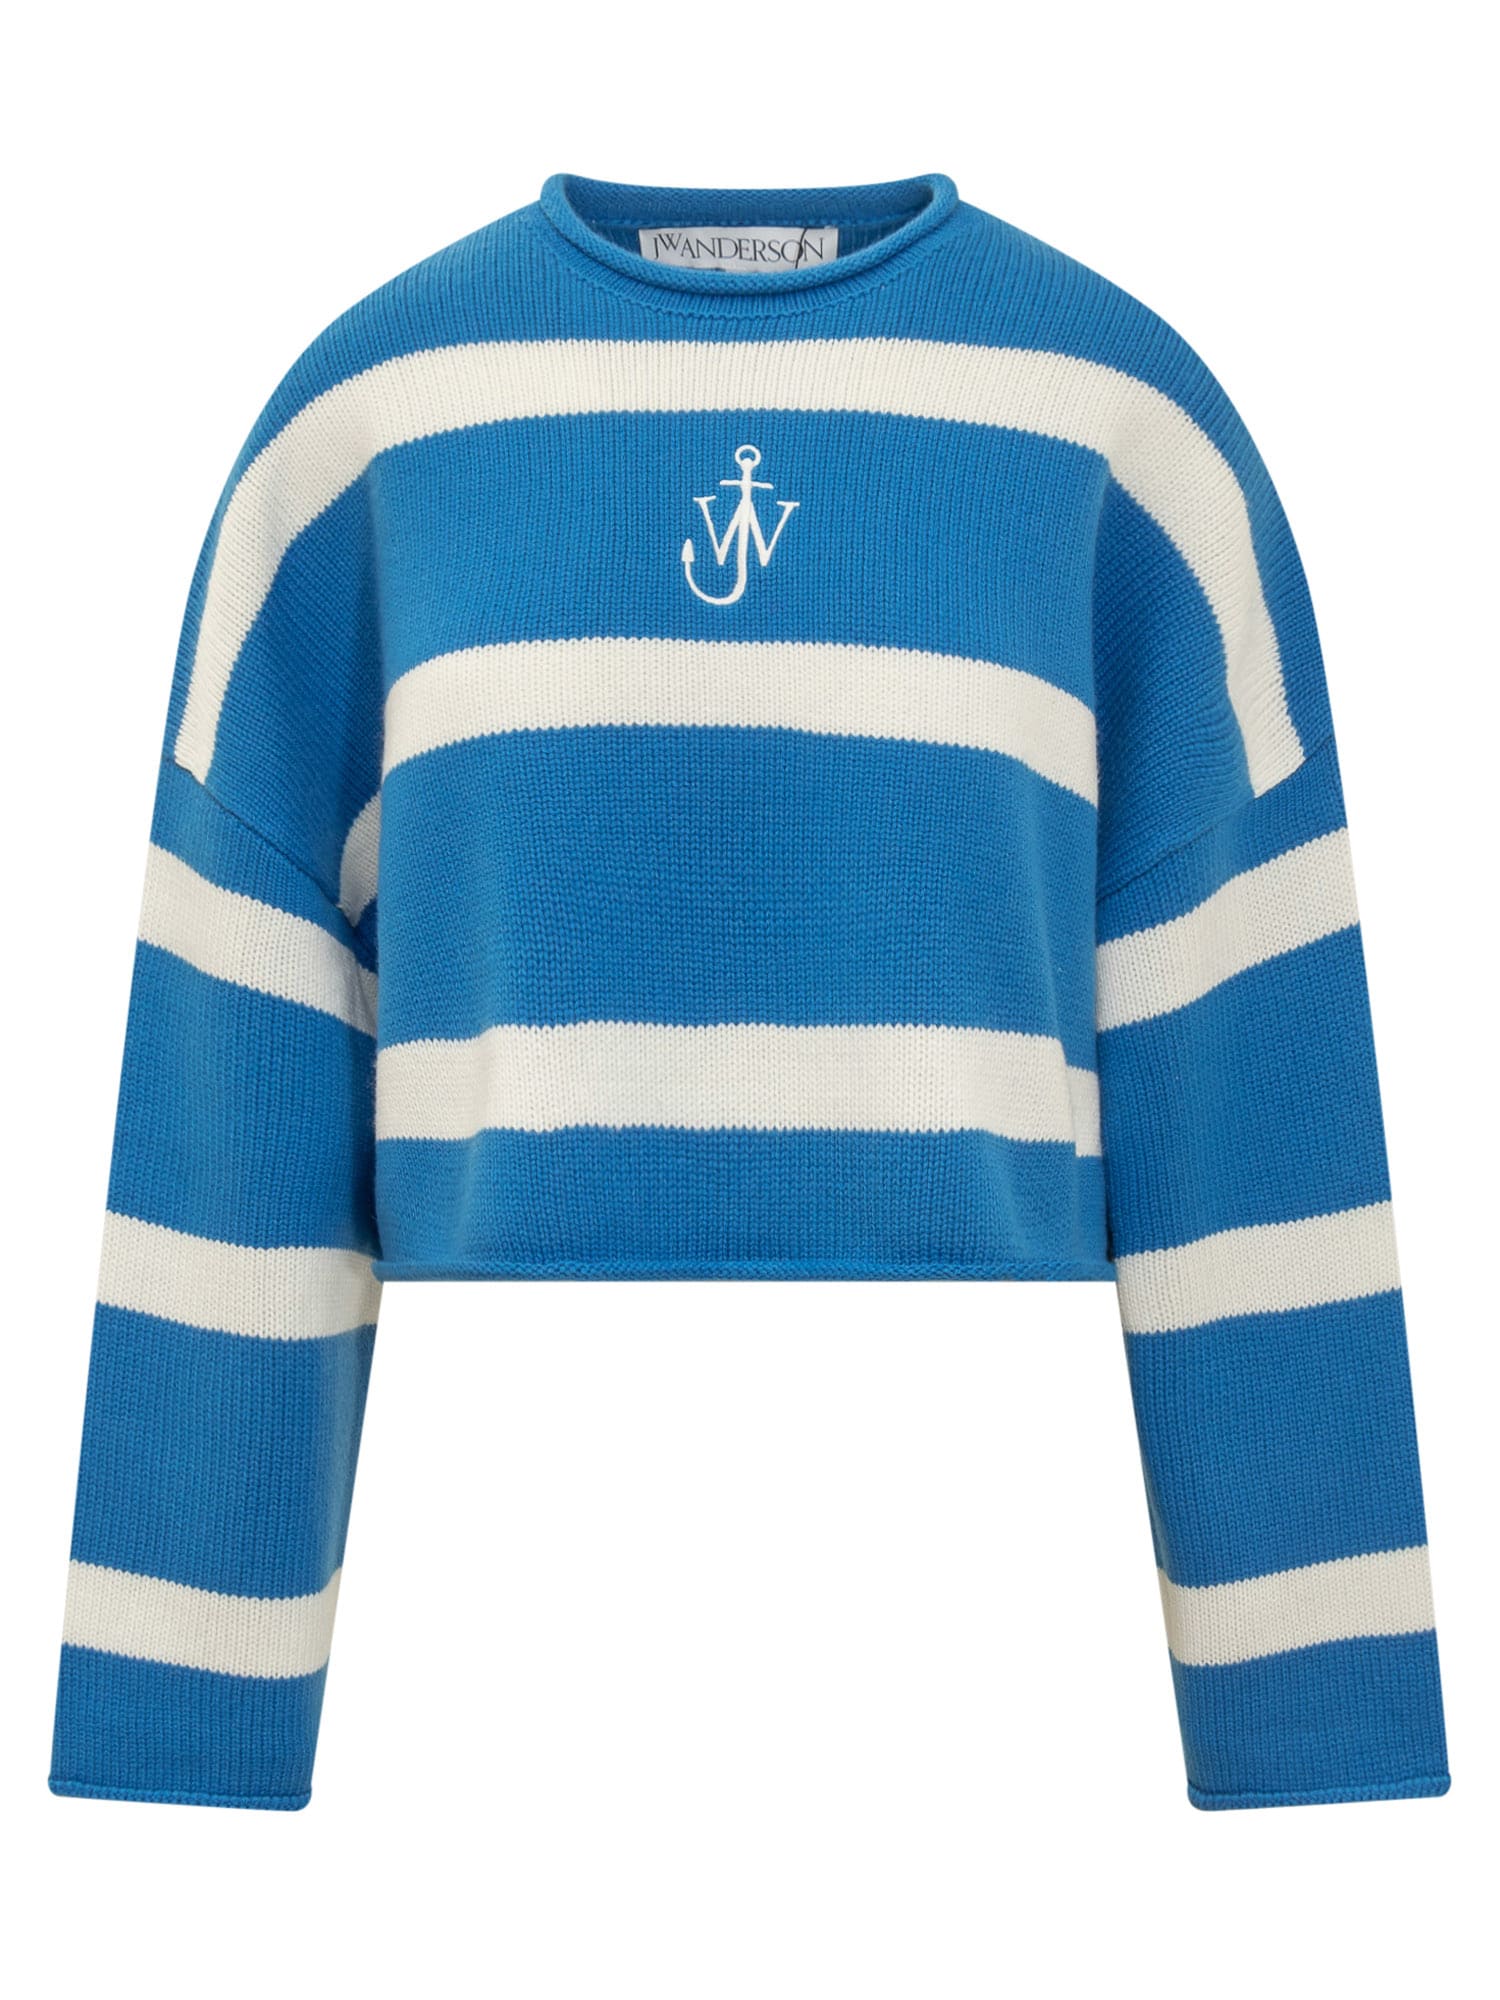 JW ANDERSON CROPPED ANCHOR JUMPER